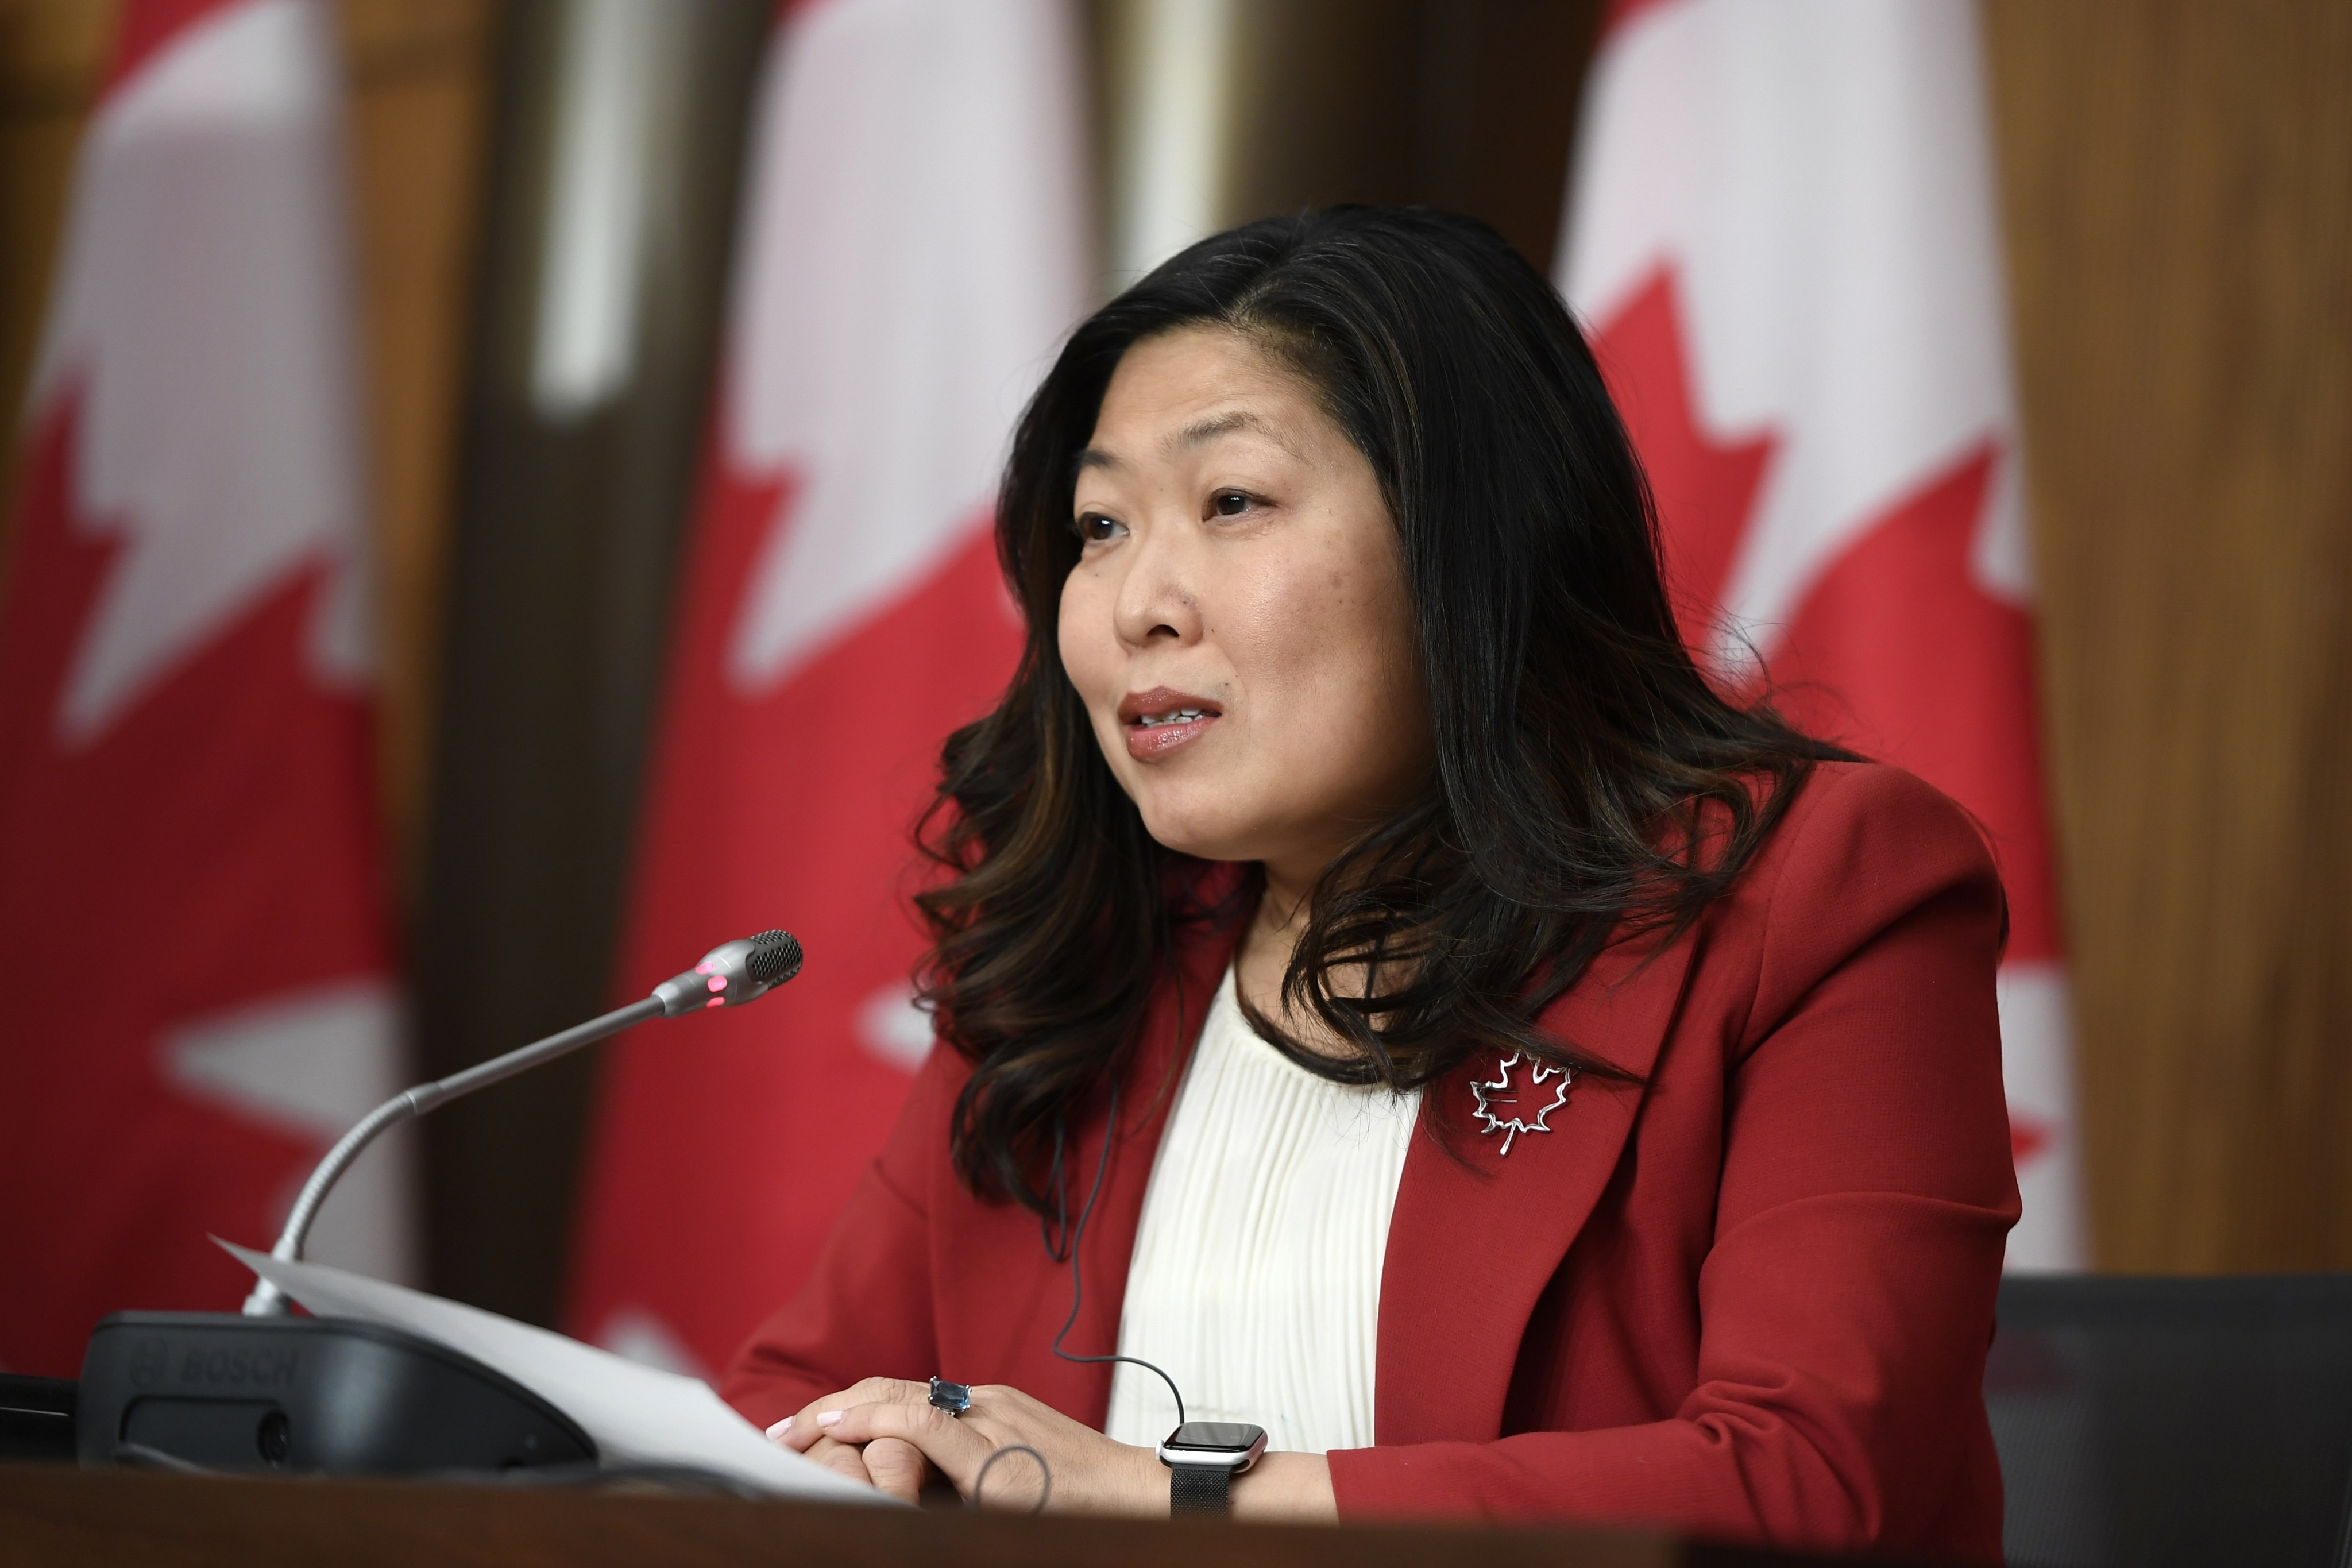 Canada’s International Trade Minister Mary Ng spoke with Taiwan’s Minister-Without-Portfolio John Deng on Sunday, striking an agreement to launch talks on a direct investment arrangement. Photo: AP